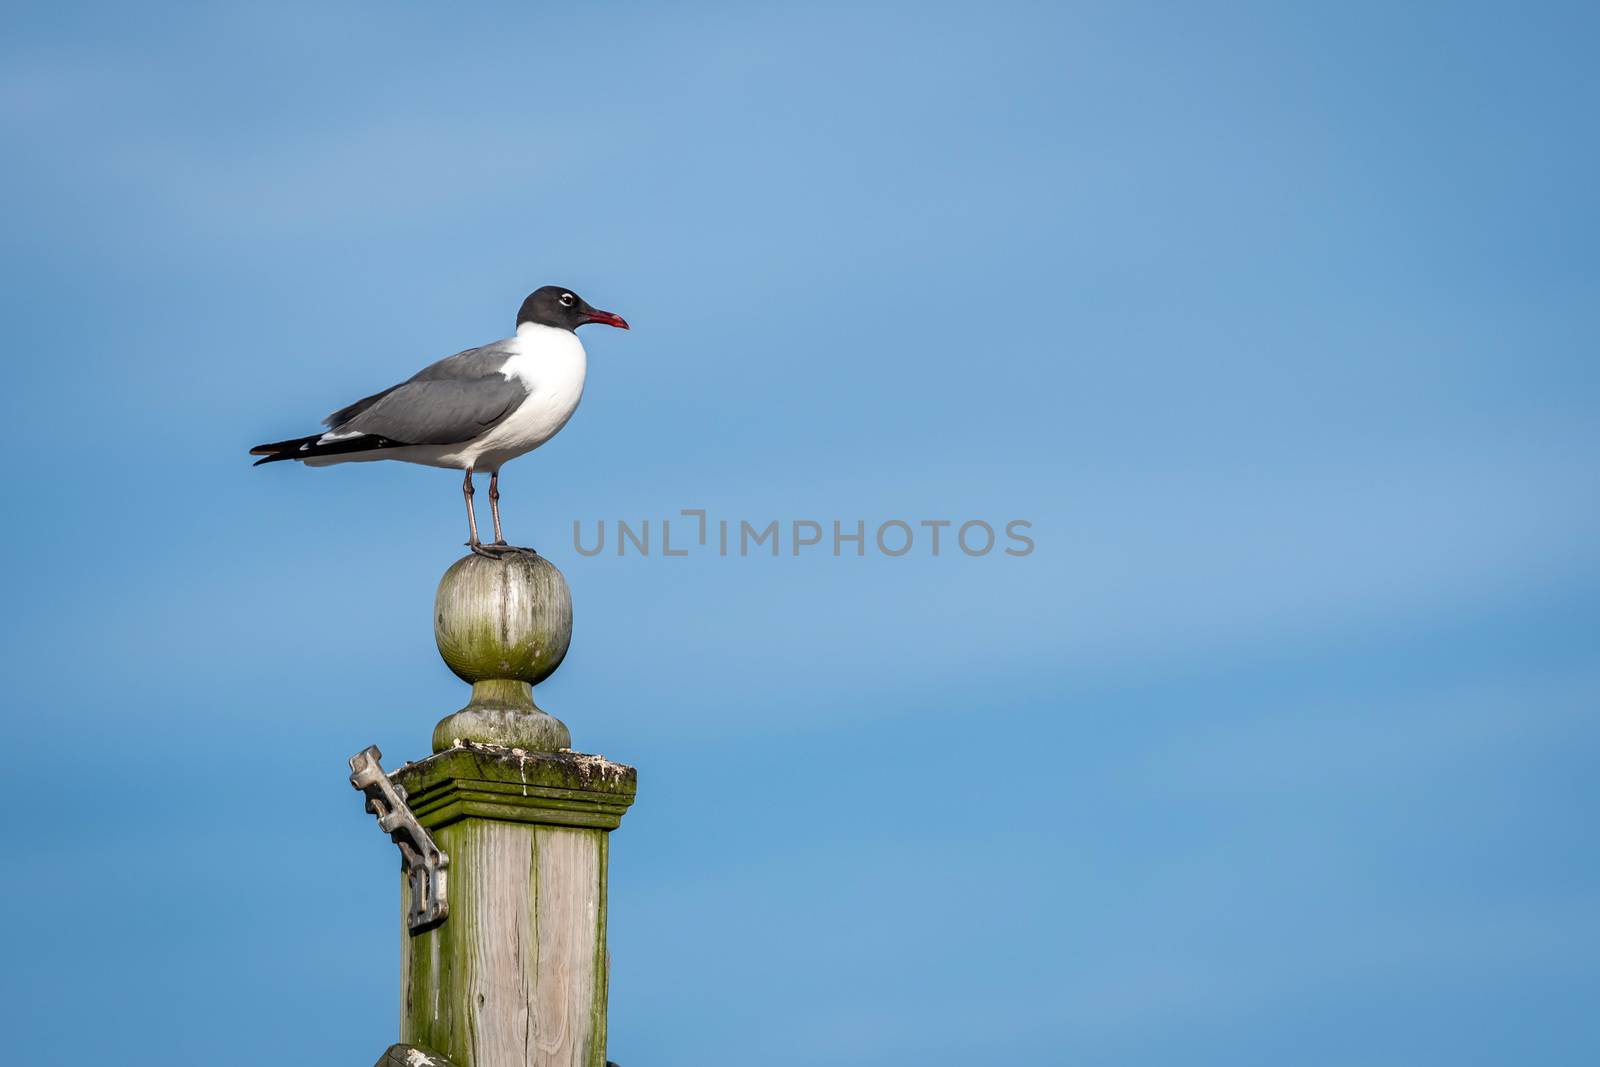 The gull sits at the head of the pole on a light blue sky